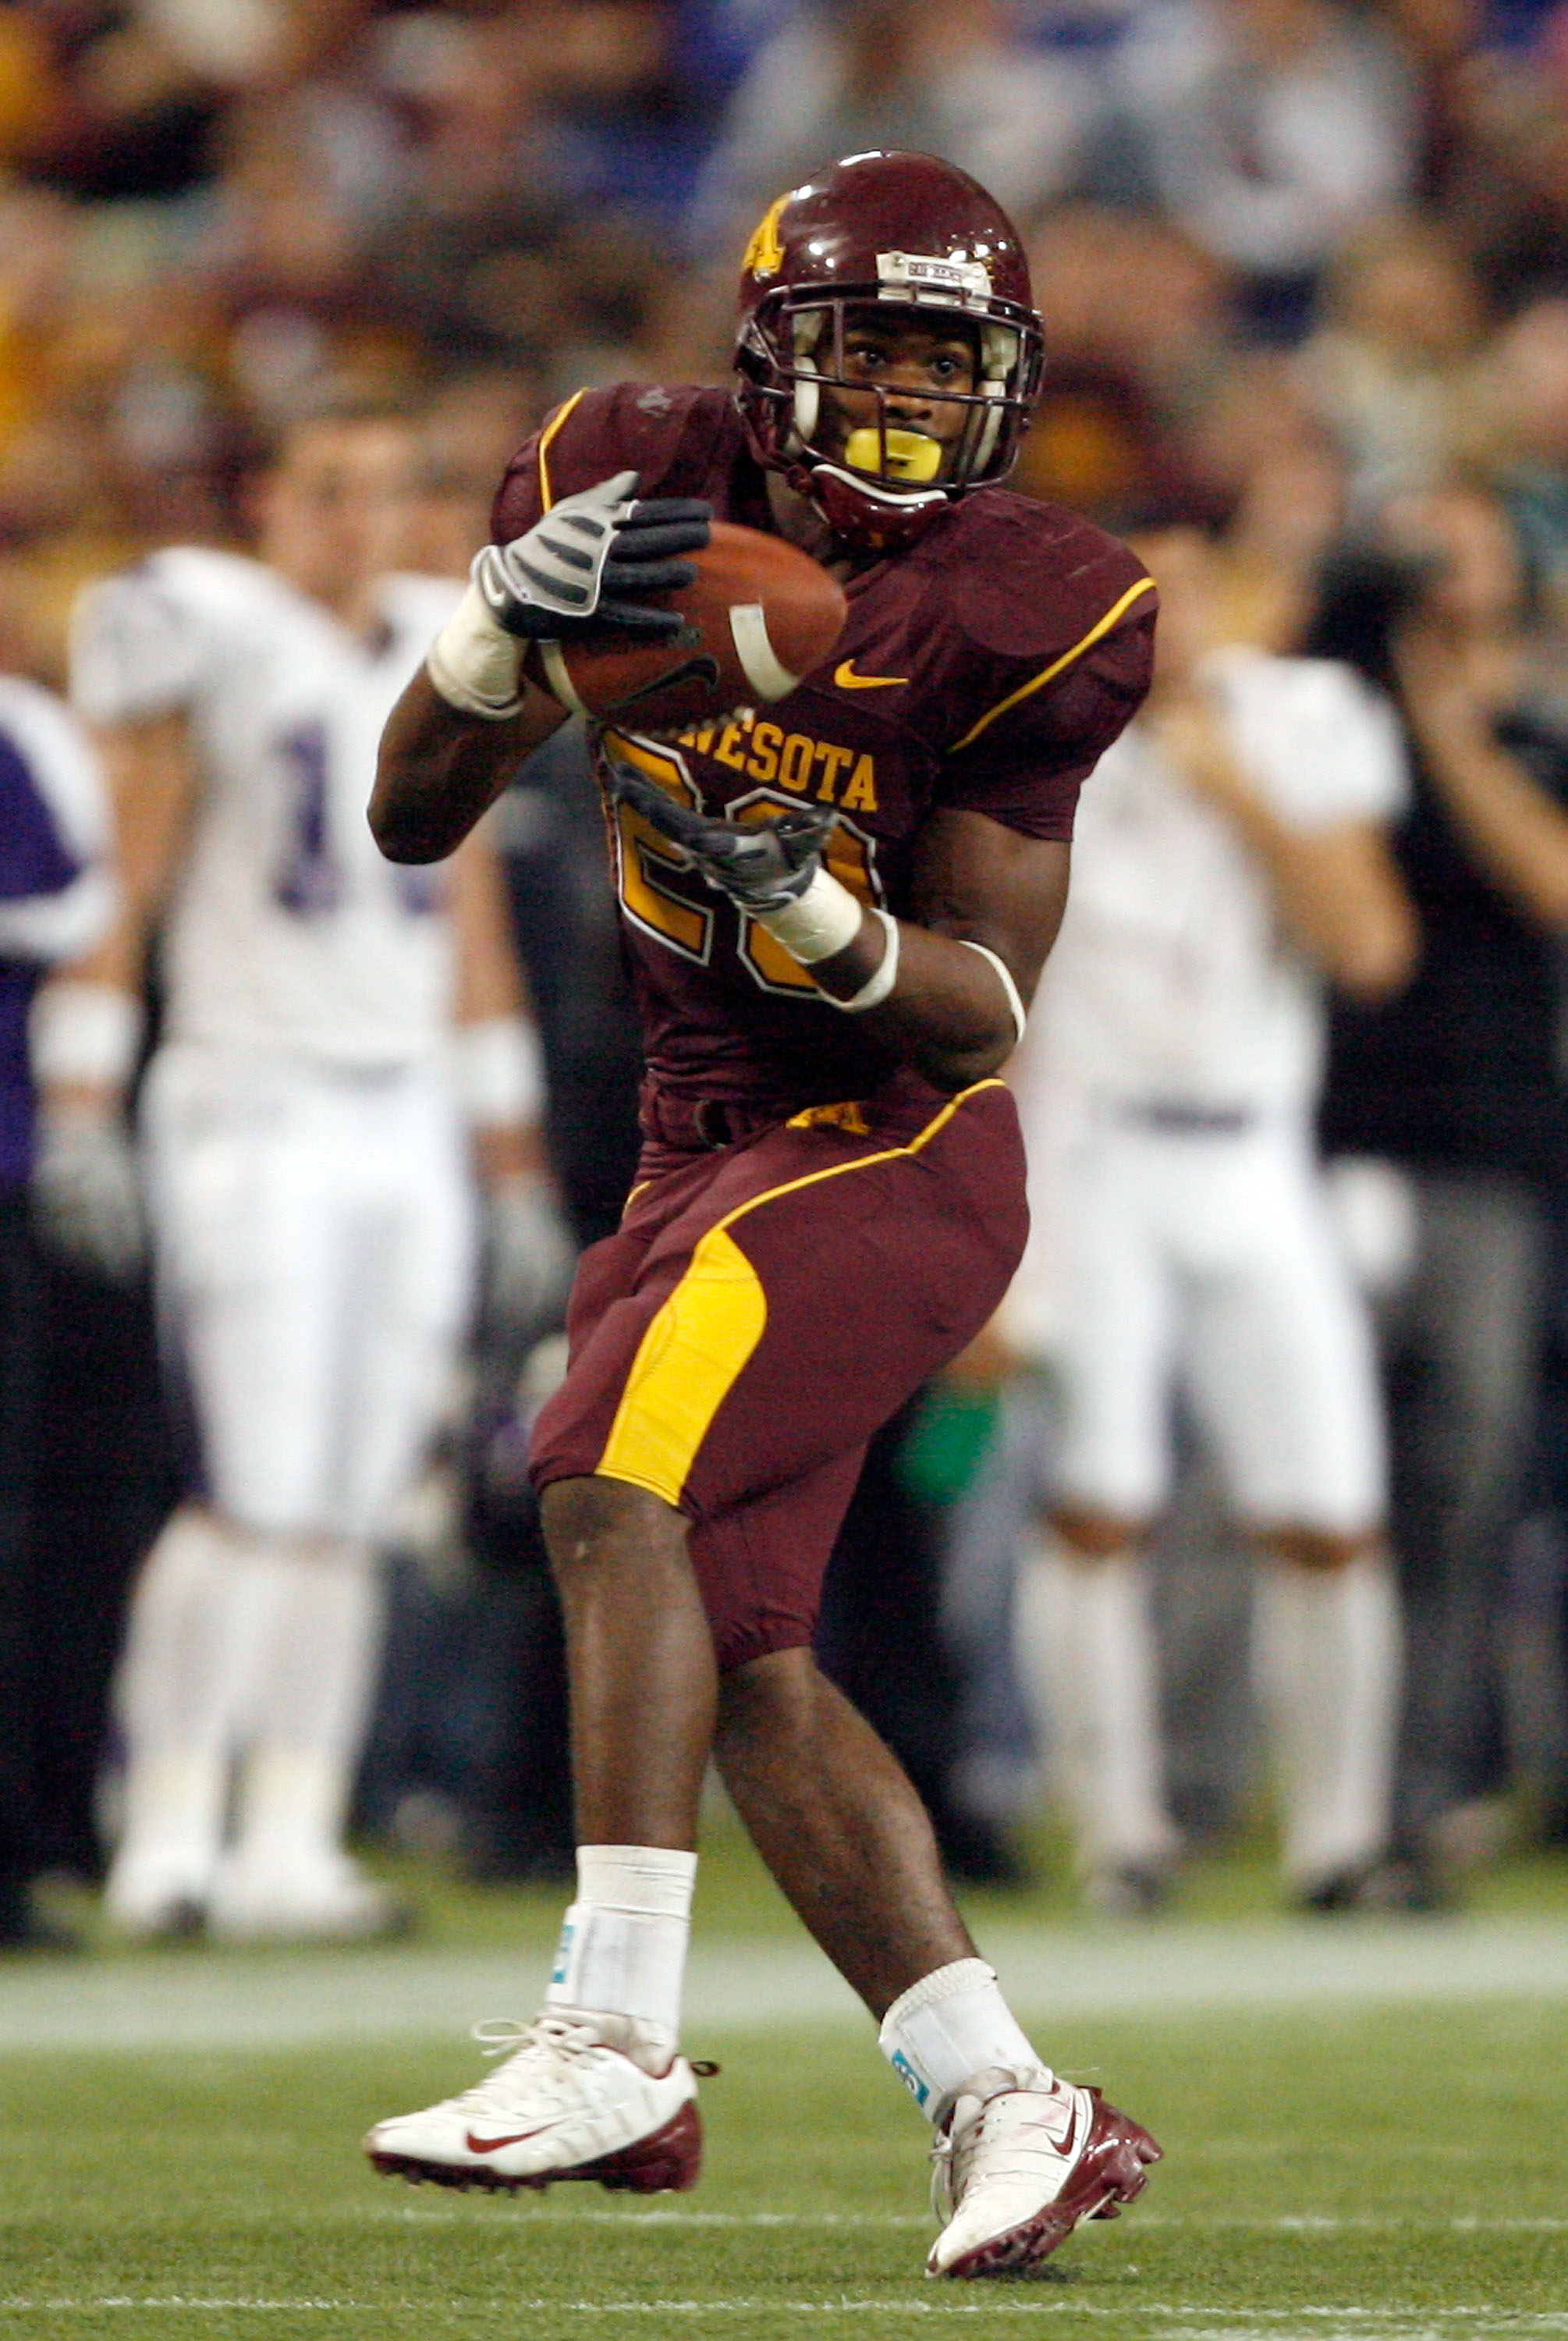 MINNEAPOLIS - NOVEMBER 01:  DeLeon Eskridge #23 of the Minnesota Golden Gophers makes a catch against the Northwestern Wildcats during the third quarter at the Hubert H.Humphrey Metrodome on November 1, 2008 in Minneapolis, Minnesota.  (Photo by Harry How